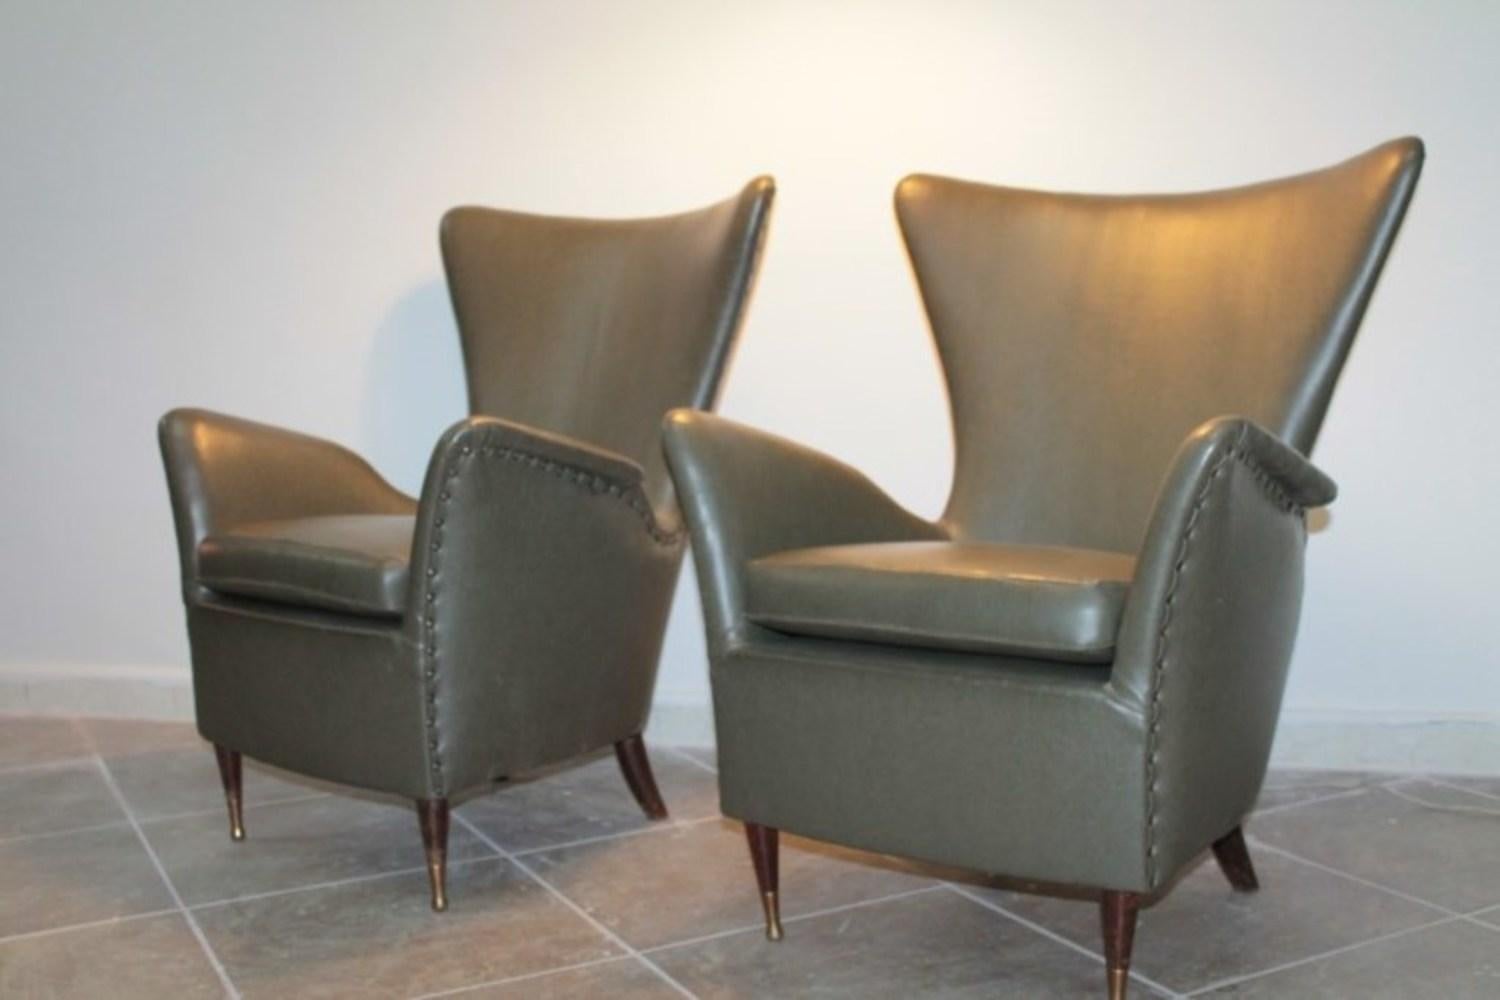 Midcentury Italian armchairs attributed to Gio Ponti, wood legs and 